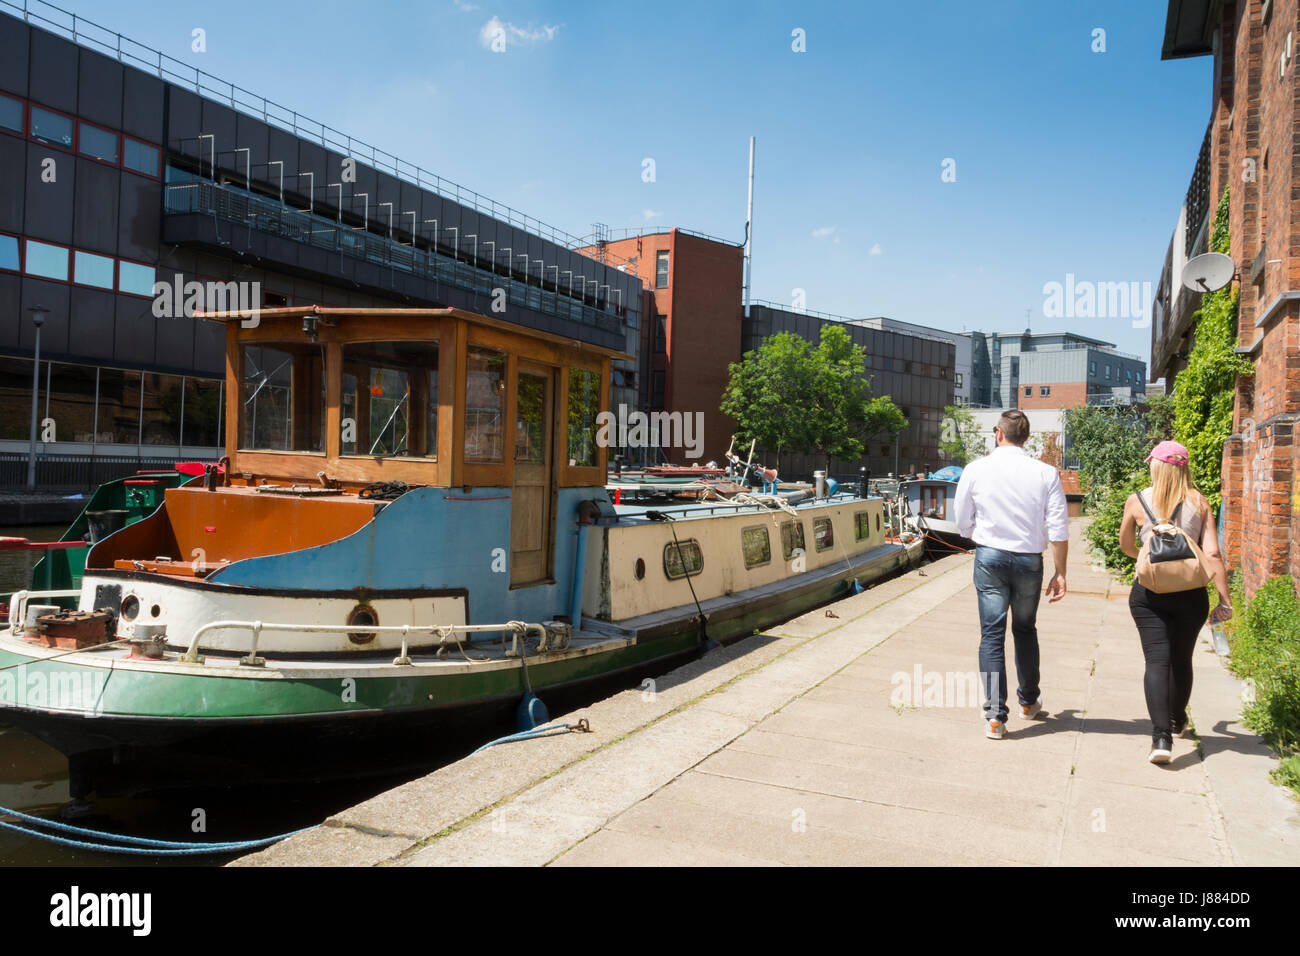 The Grand Union Canal near King's Cross in London, England, UK. Stock Photo